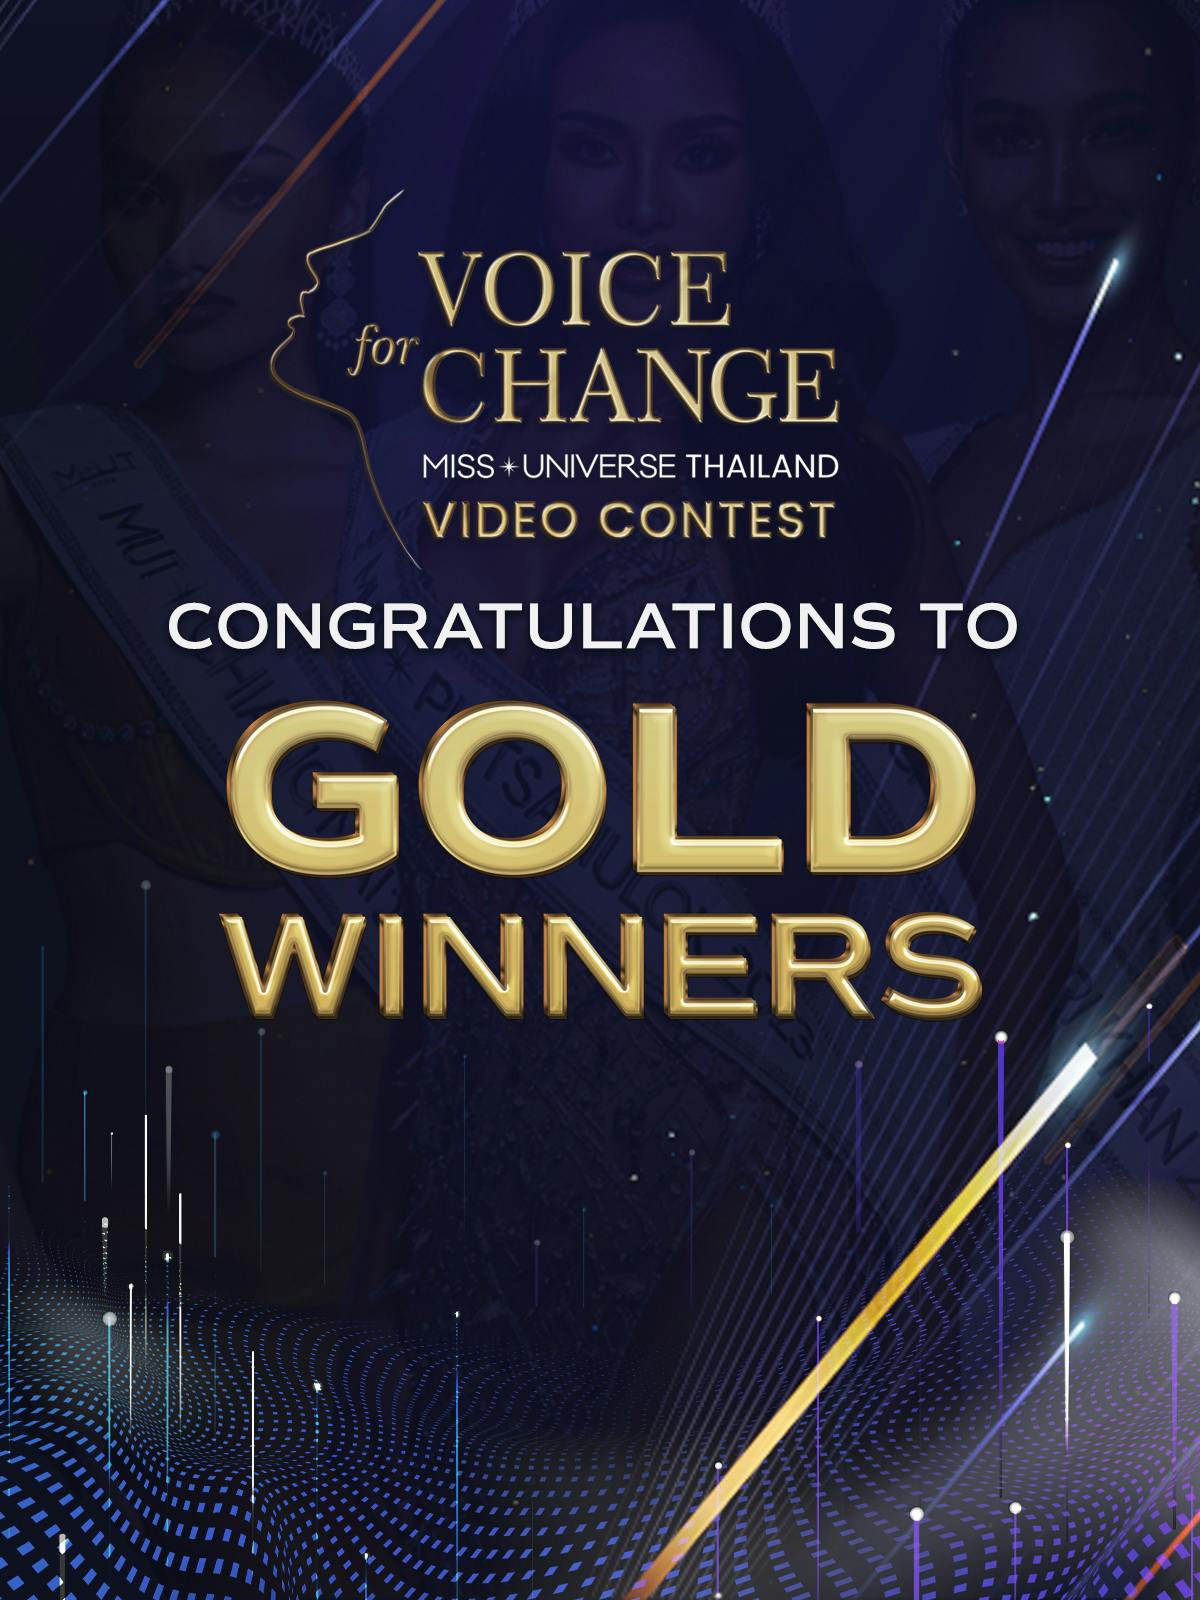 The 3 Gold Winners: Voice for Change MUT 23